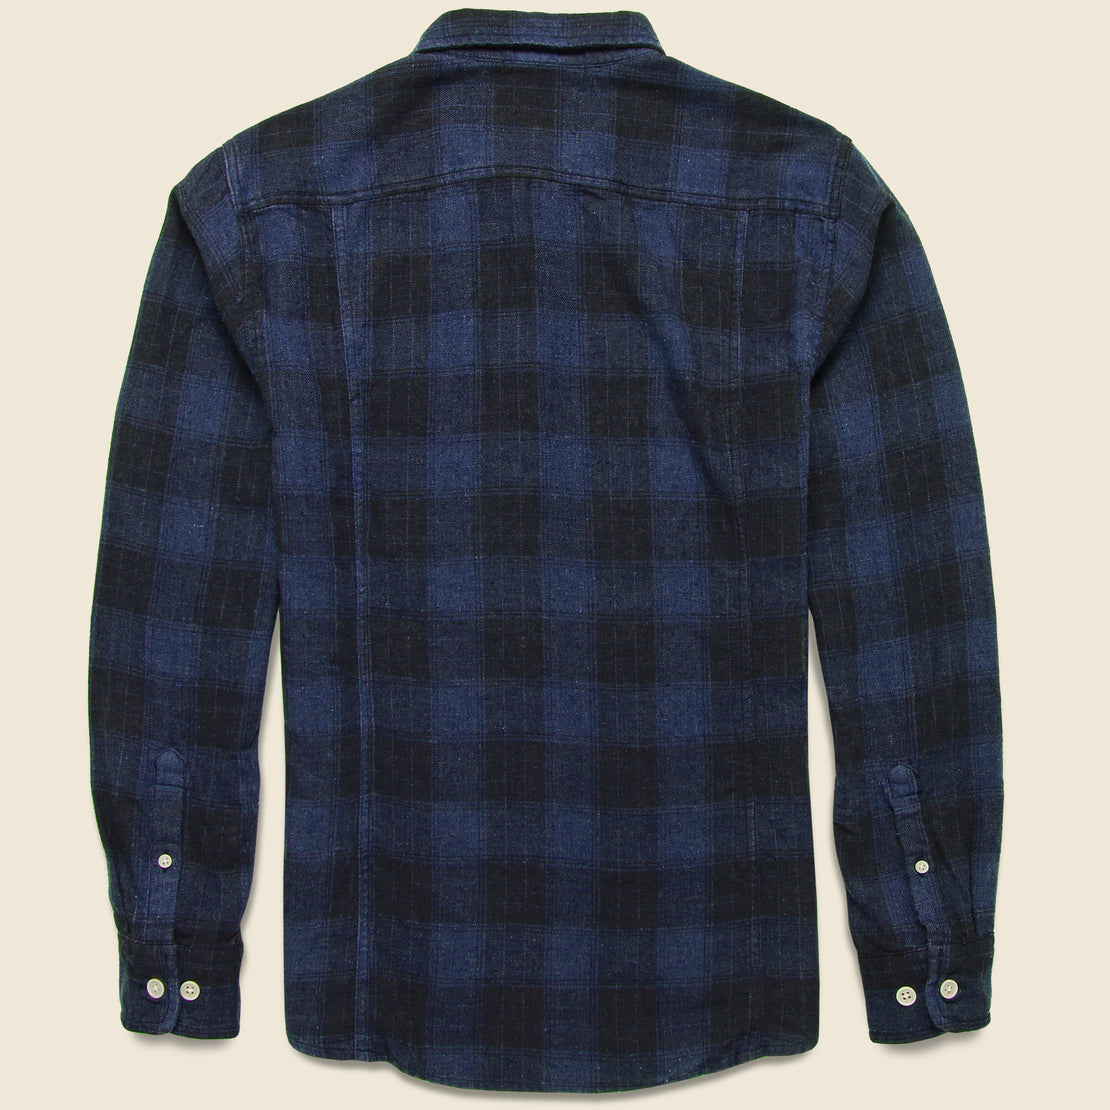 Recycled Plaid Flannel - Indigo - Corridor - STAG Provisions - Tops - L/S Woven - Plaid